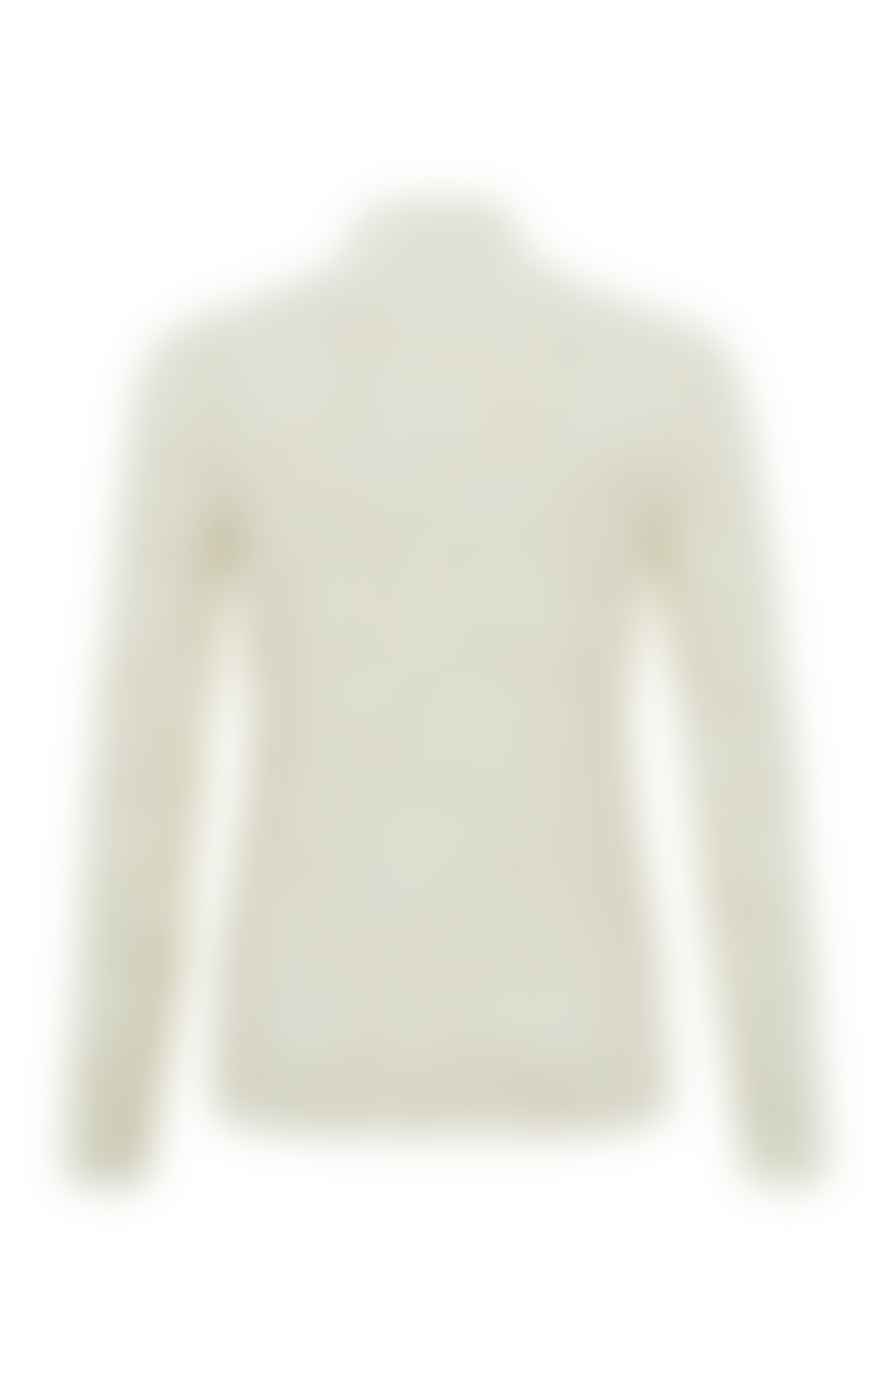 Yaya Jersey Top With Turtleneck, Long Sleeves And Playful Print - Bone White Dessin